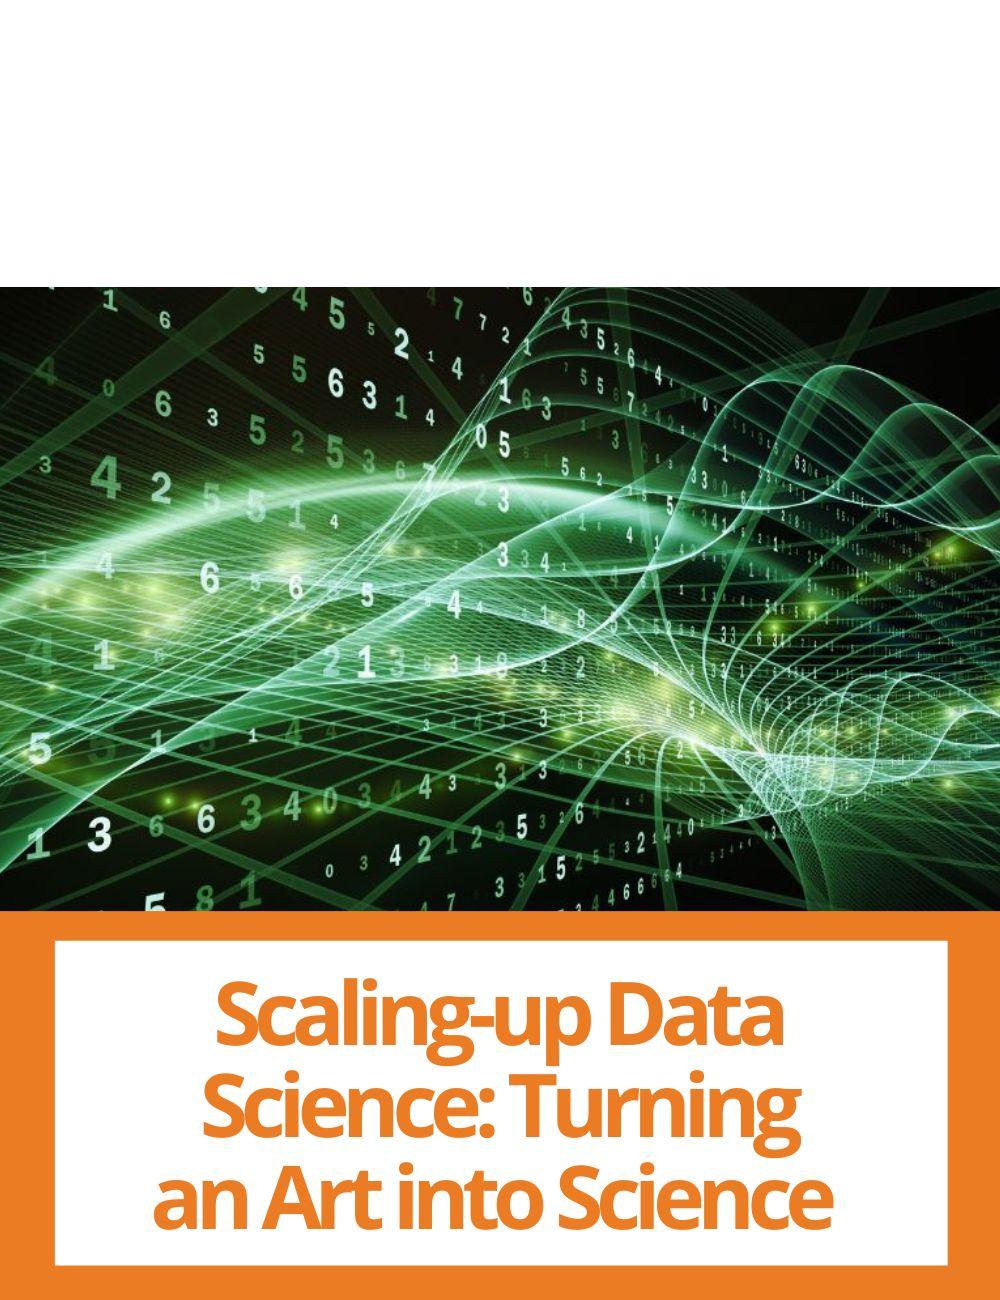 Link to related stories. Image: elements that recall data and computing sciences. Story headline: Scaling-up Data Science: Turning an Art into Science